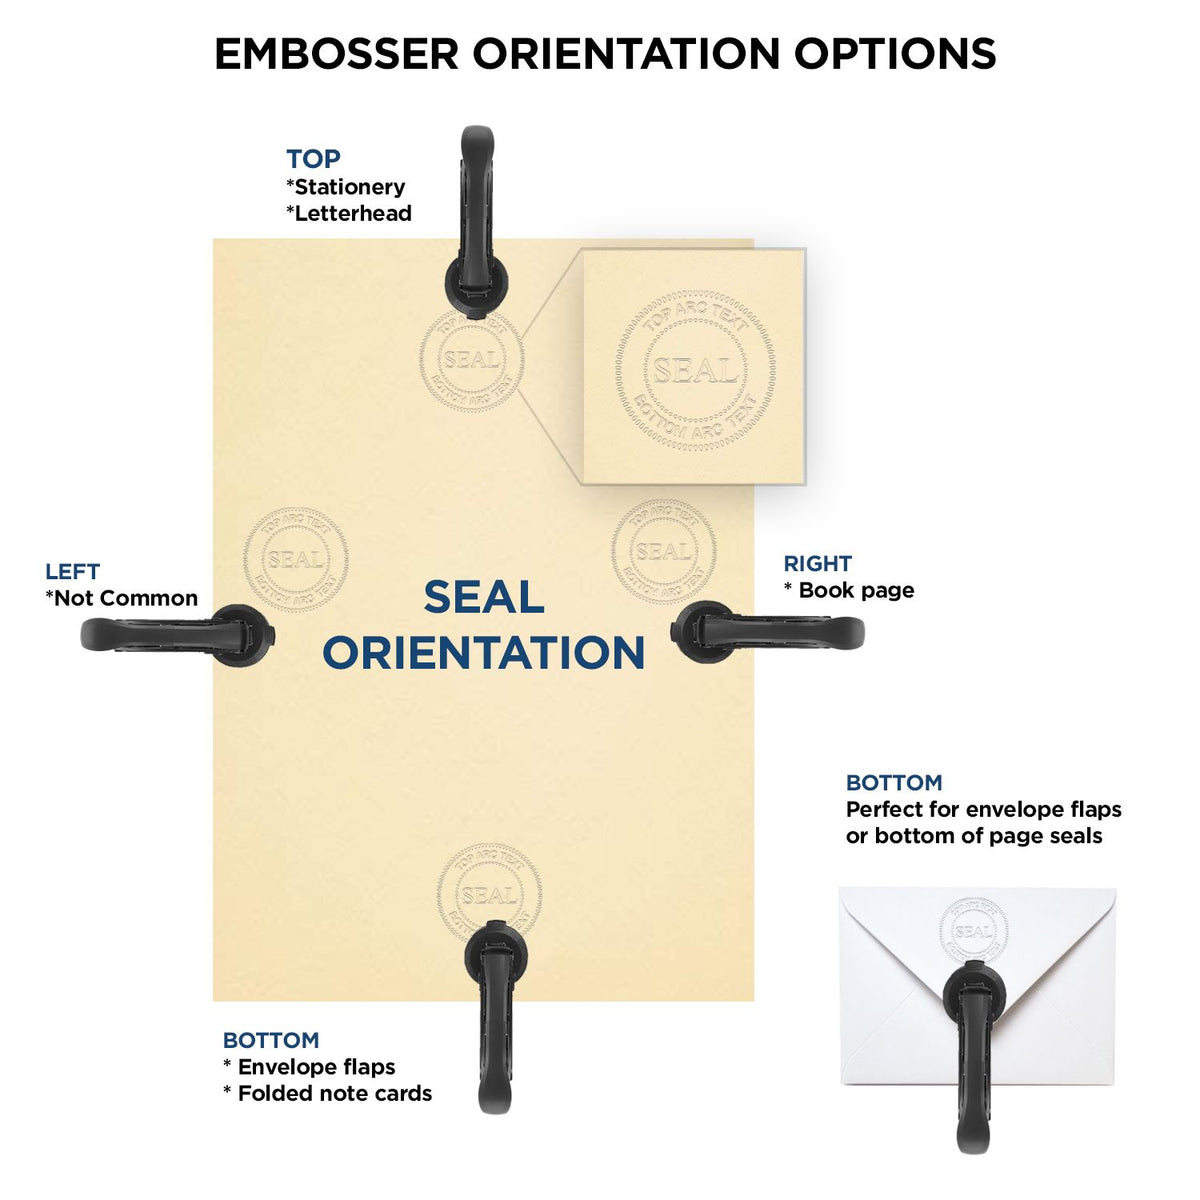 An infographic for the Handheld Illinois Architect Seal Embosser showing embosser orientation, this is showing examples of a top, bottom, right and left insert.